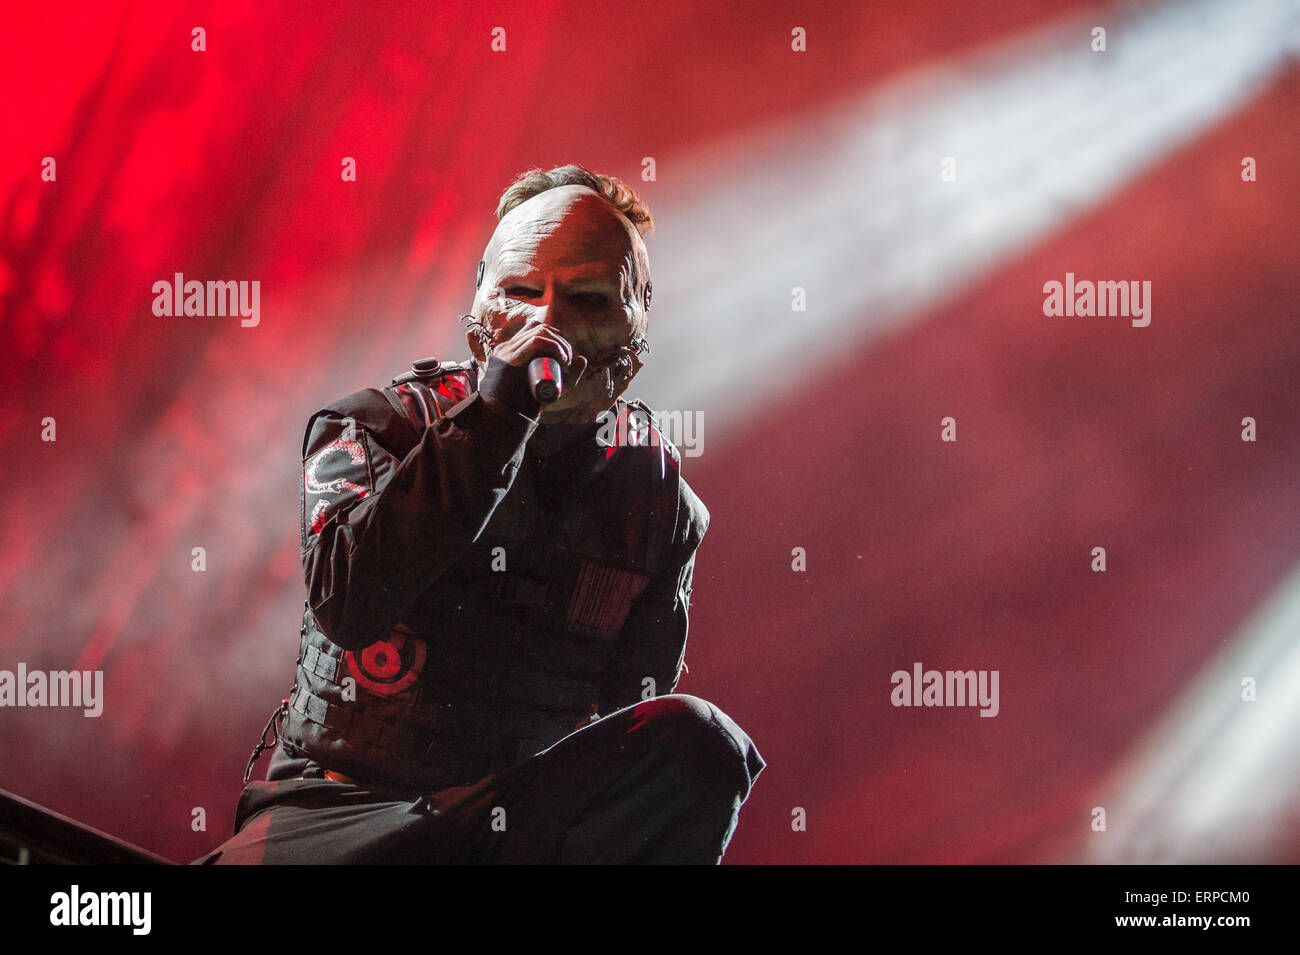 Nuenberg, Germany. 5th June, 2015. The singer and guitarist of American band Slipknot Corey Taylor plays on stage at the music festival 'Rock im Park' in Nuenberg, Germany, 5 June 2015. The festival runs until 7 June 2015. Photo: Matthias Merz/dpa (ATTENTION EDITORS: EDITORIAL USE ONLY IN CONNECTION WITH REPORTING ON SLIPKNOT EDITORIAL USE ONLY)/dpa/Alamy Live News Stock Photo